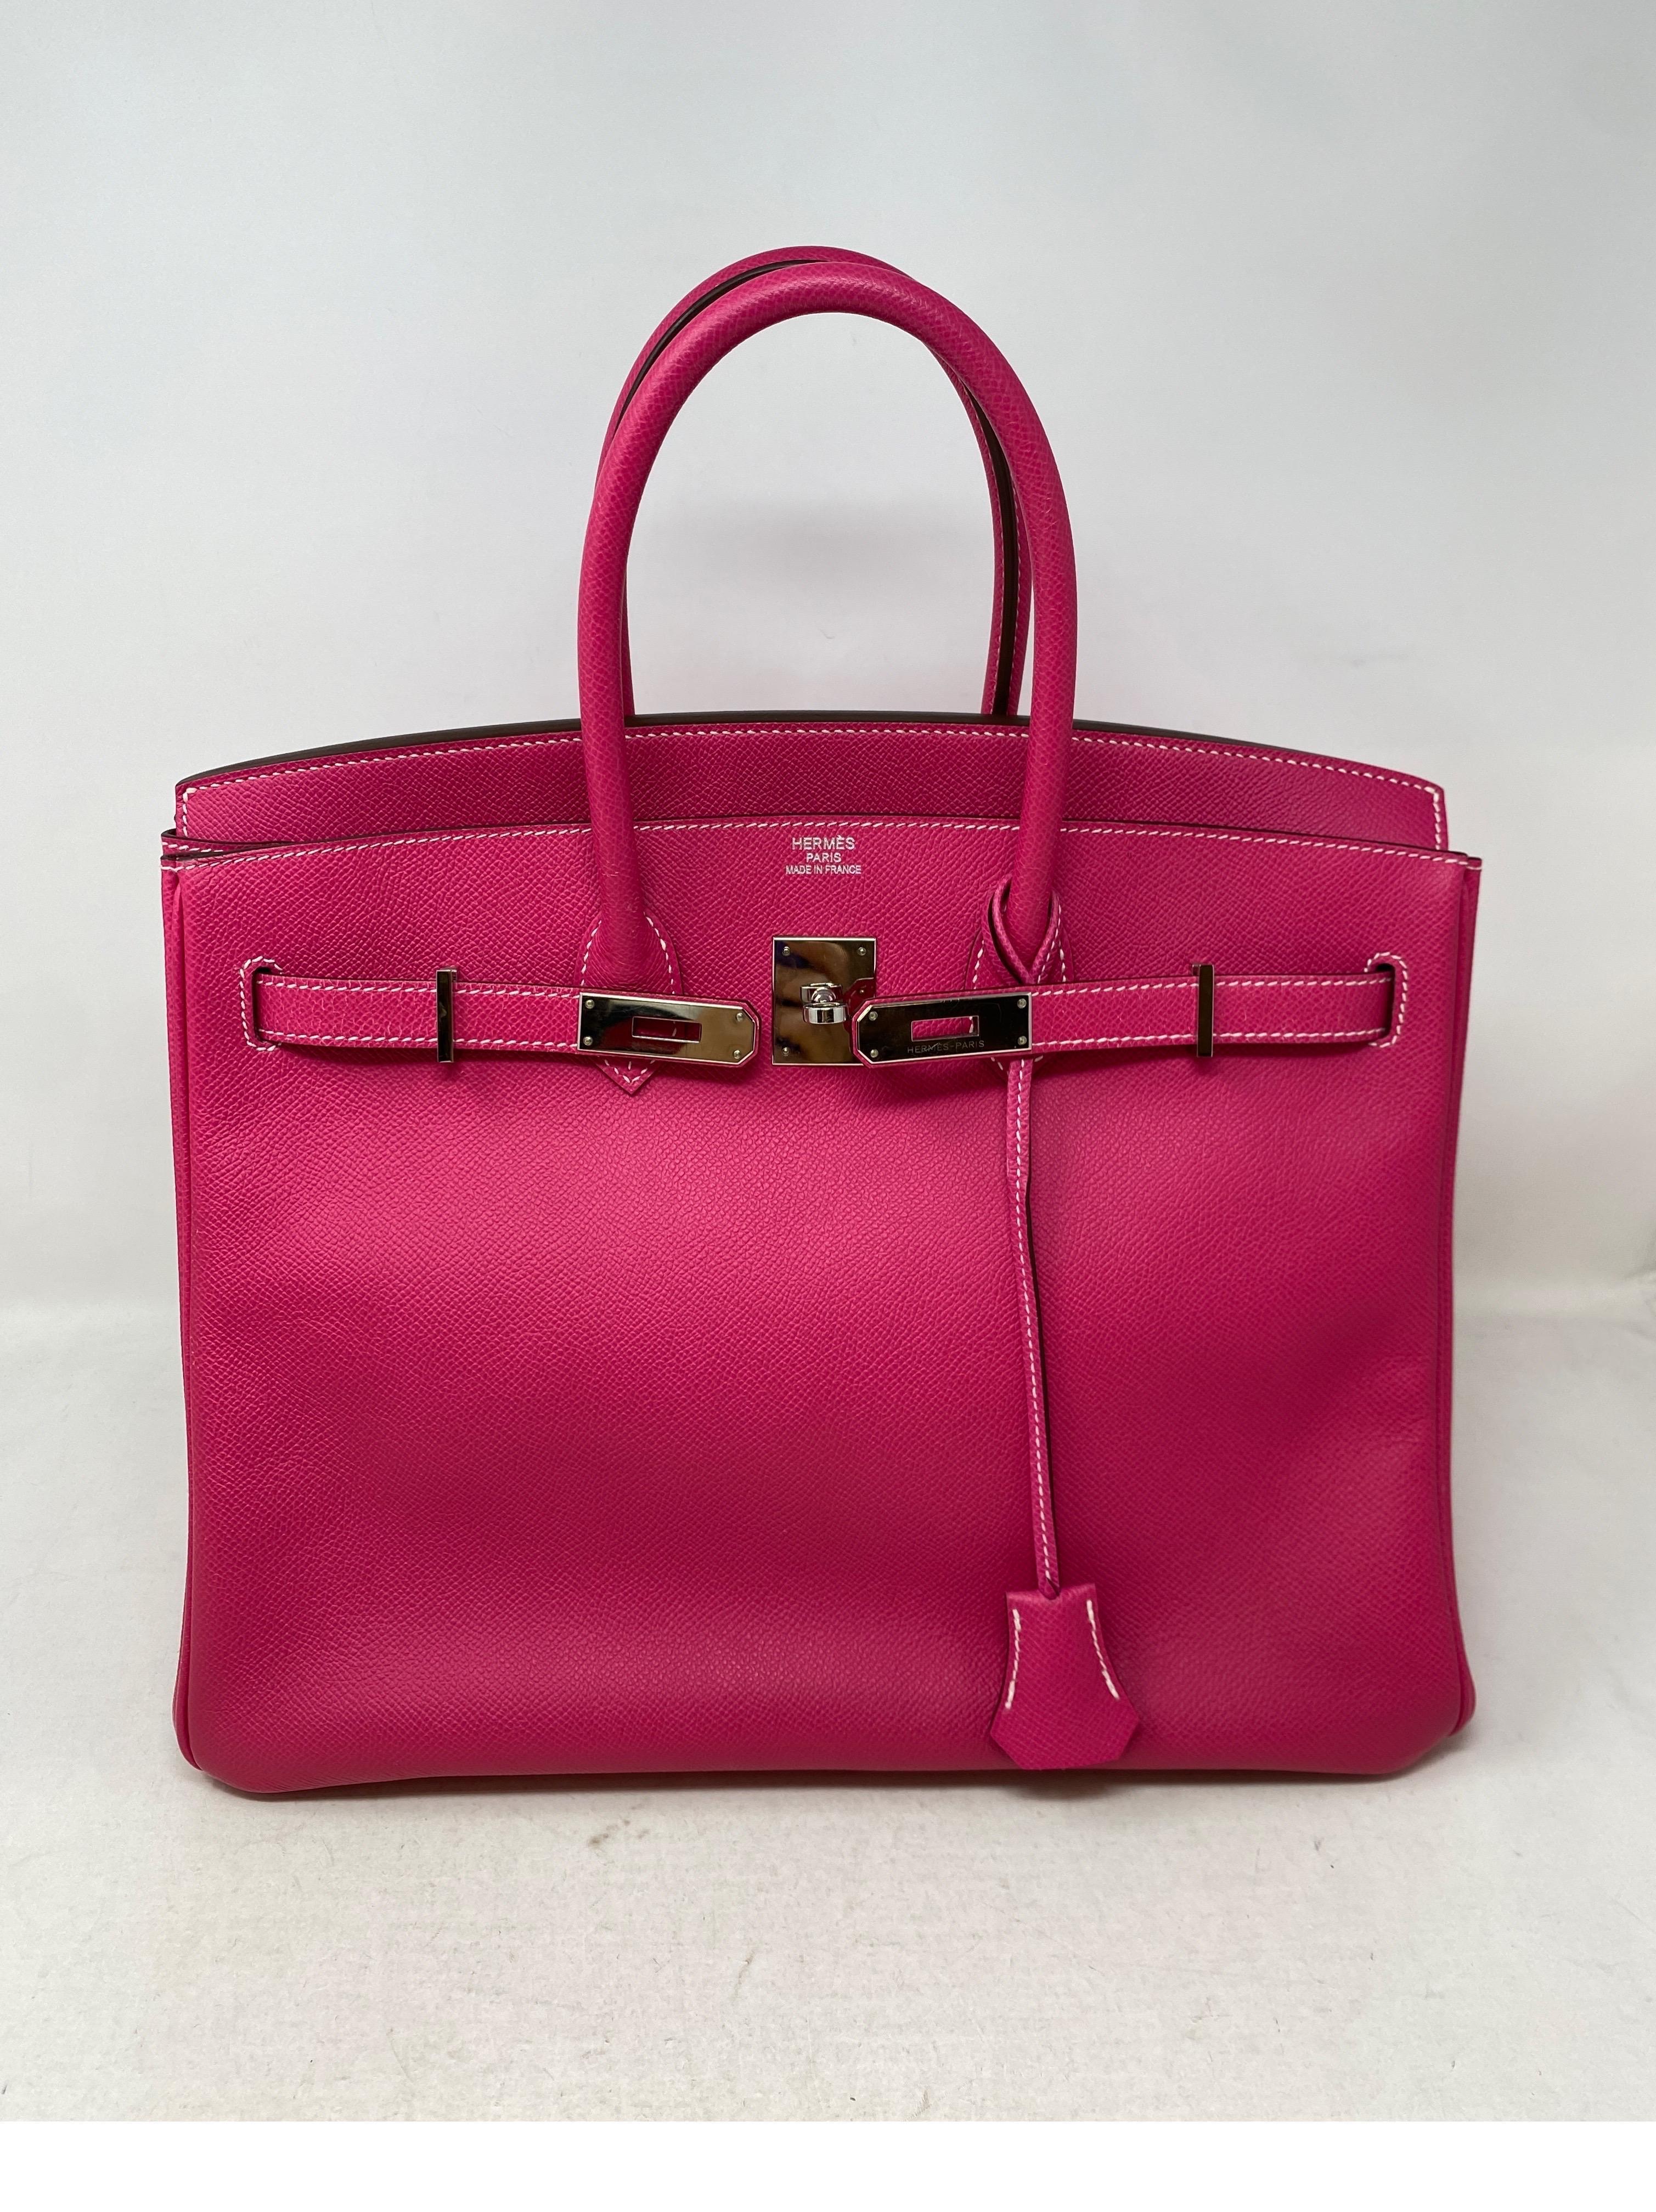 Hermes Rose Tyrien 35 Birkin Bag. Hot pink color with palladium hardware. Excellent condition. Epsom leather. Candy collection bag. Interior is a different color. Rouge red interior. Interior is clean. Includes clochette, lock, keys, and dust bag.